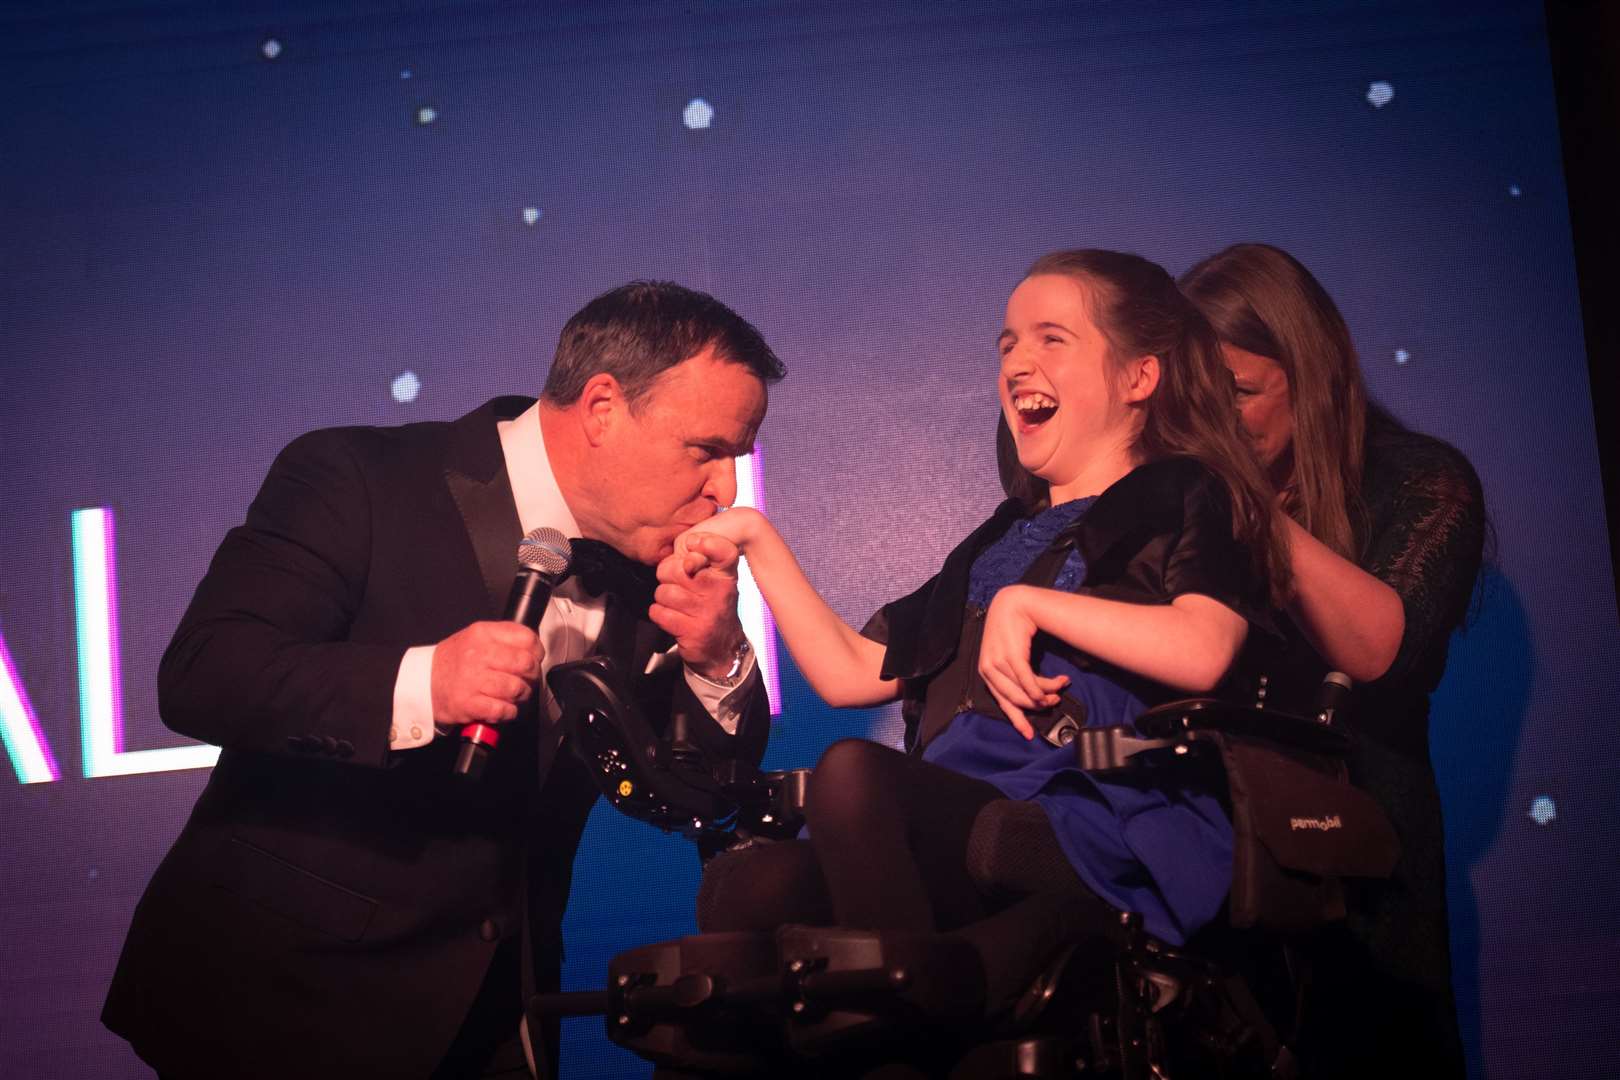 Steve Walsh as Frank Sinatra with daughter Sophia as backing singer. Picture: Callum Mackay